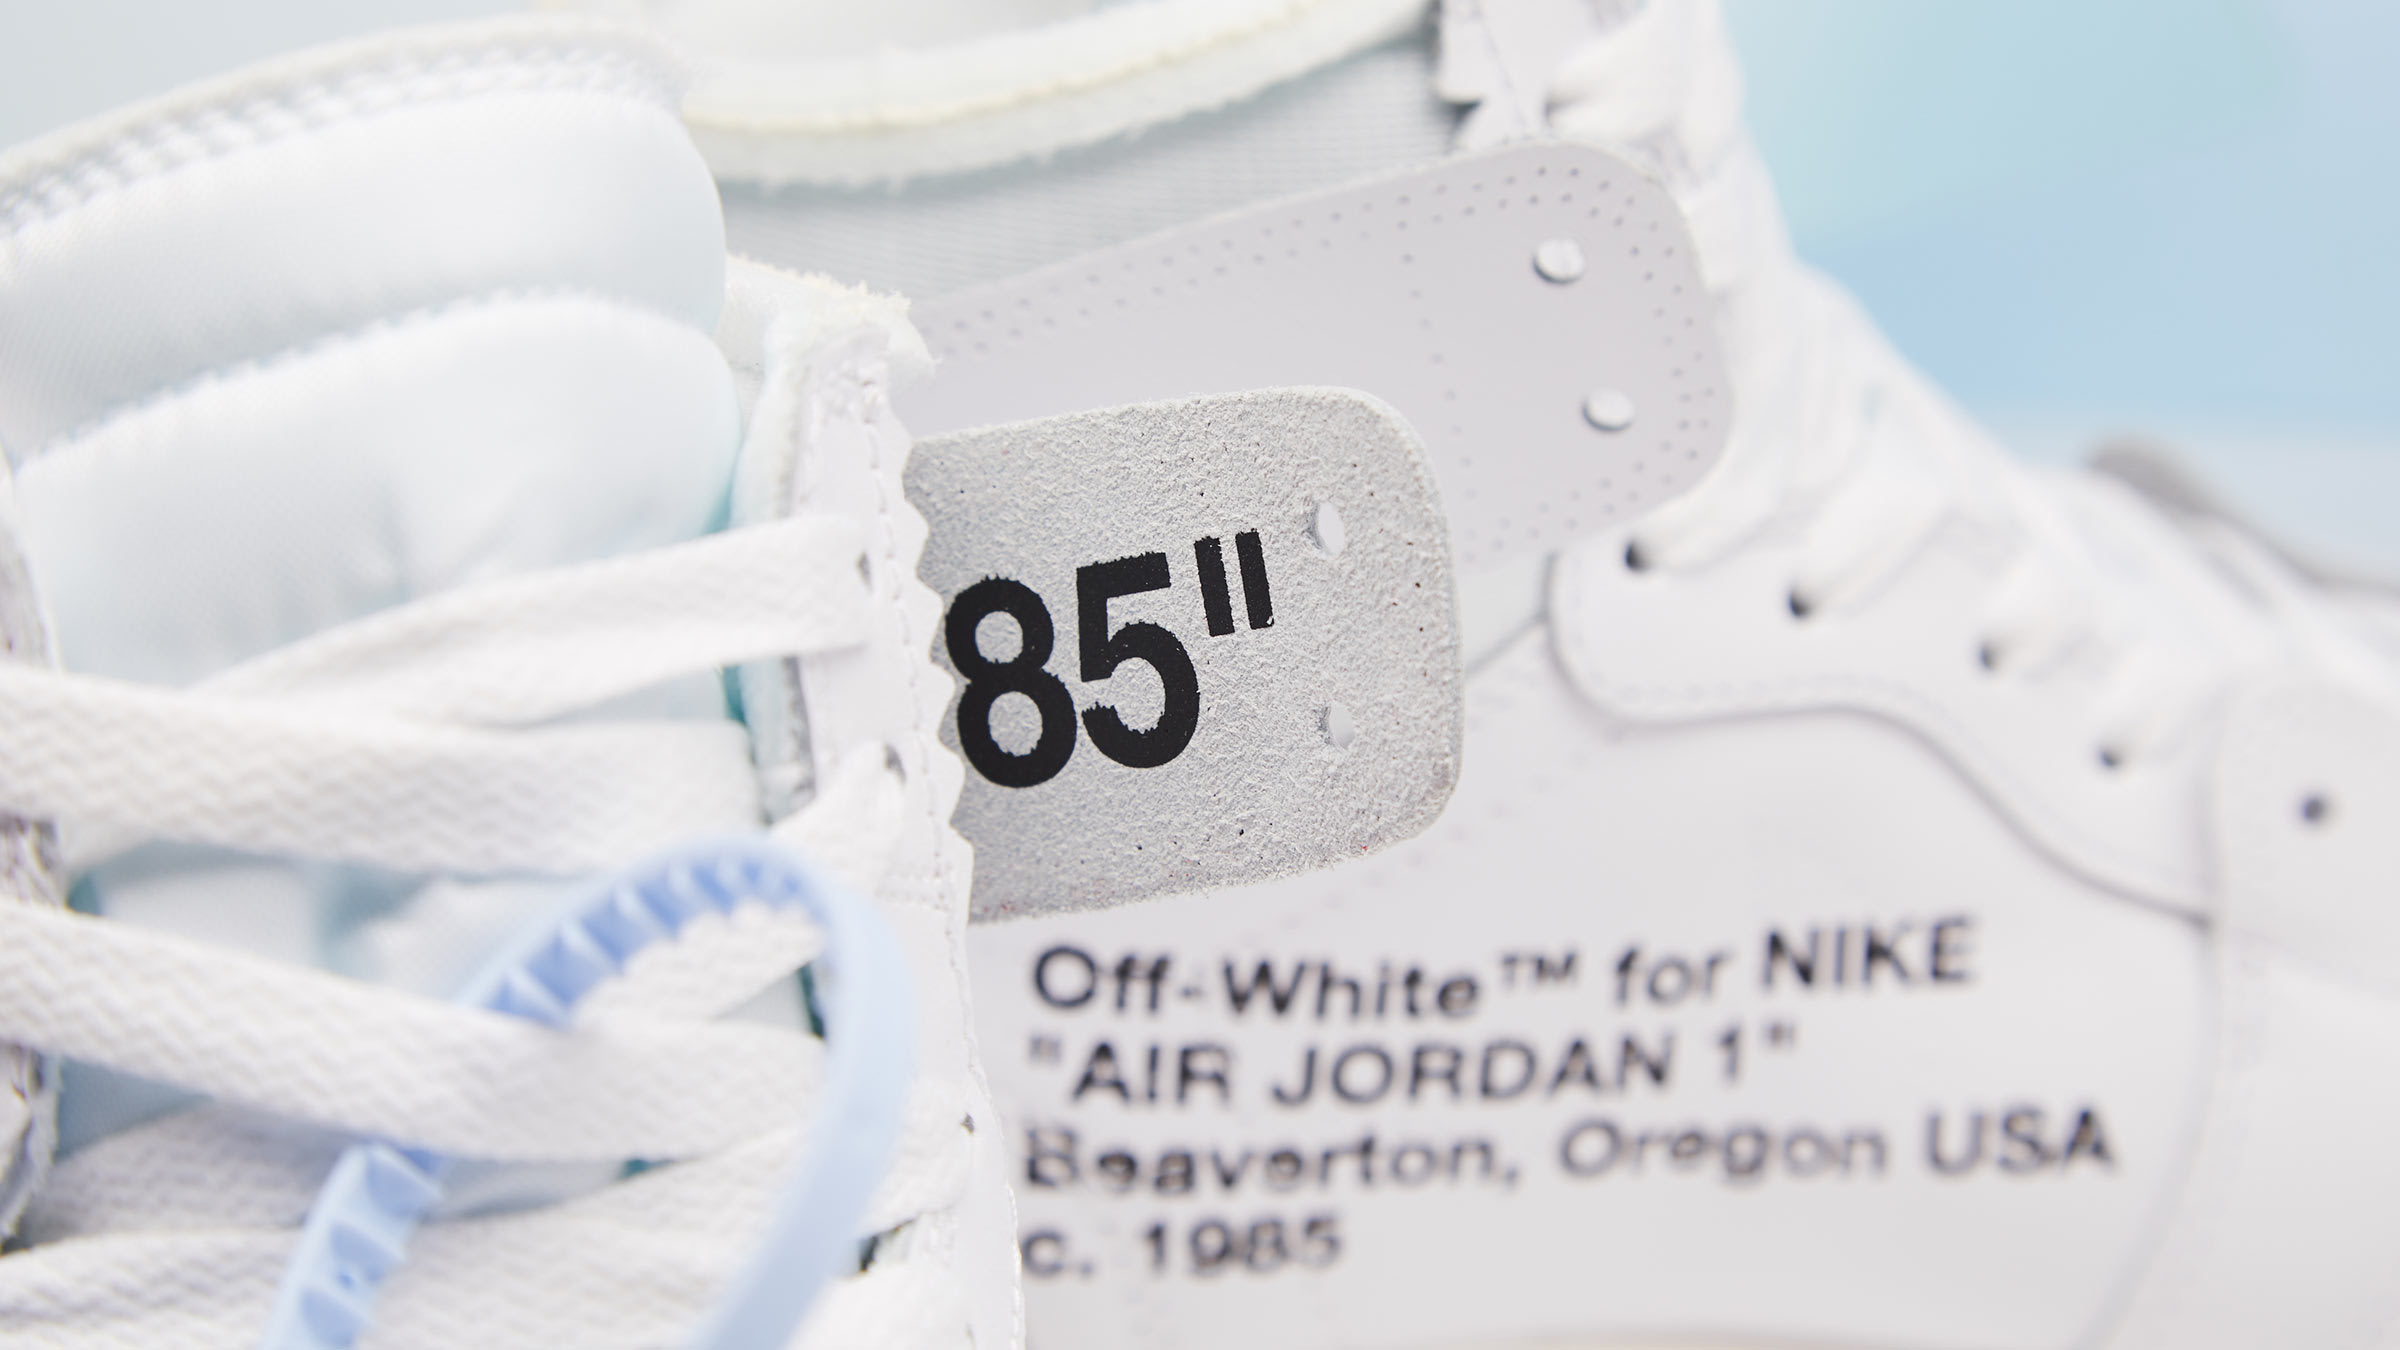 The OFF-WHITE x Nike/Jordan Footwear Collection Will Release On September  1st •